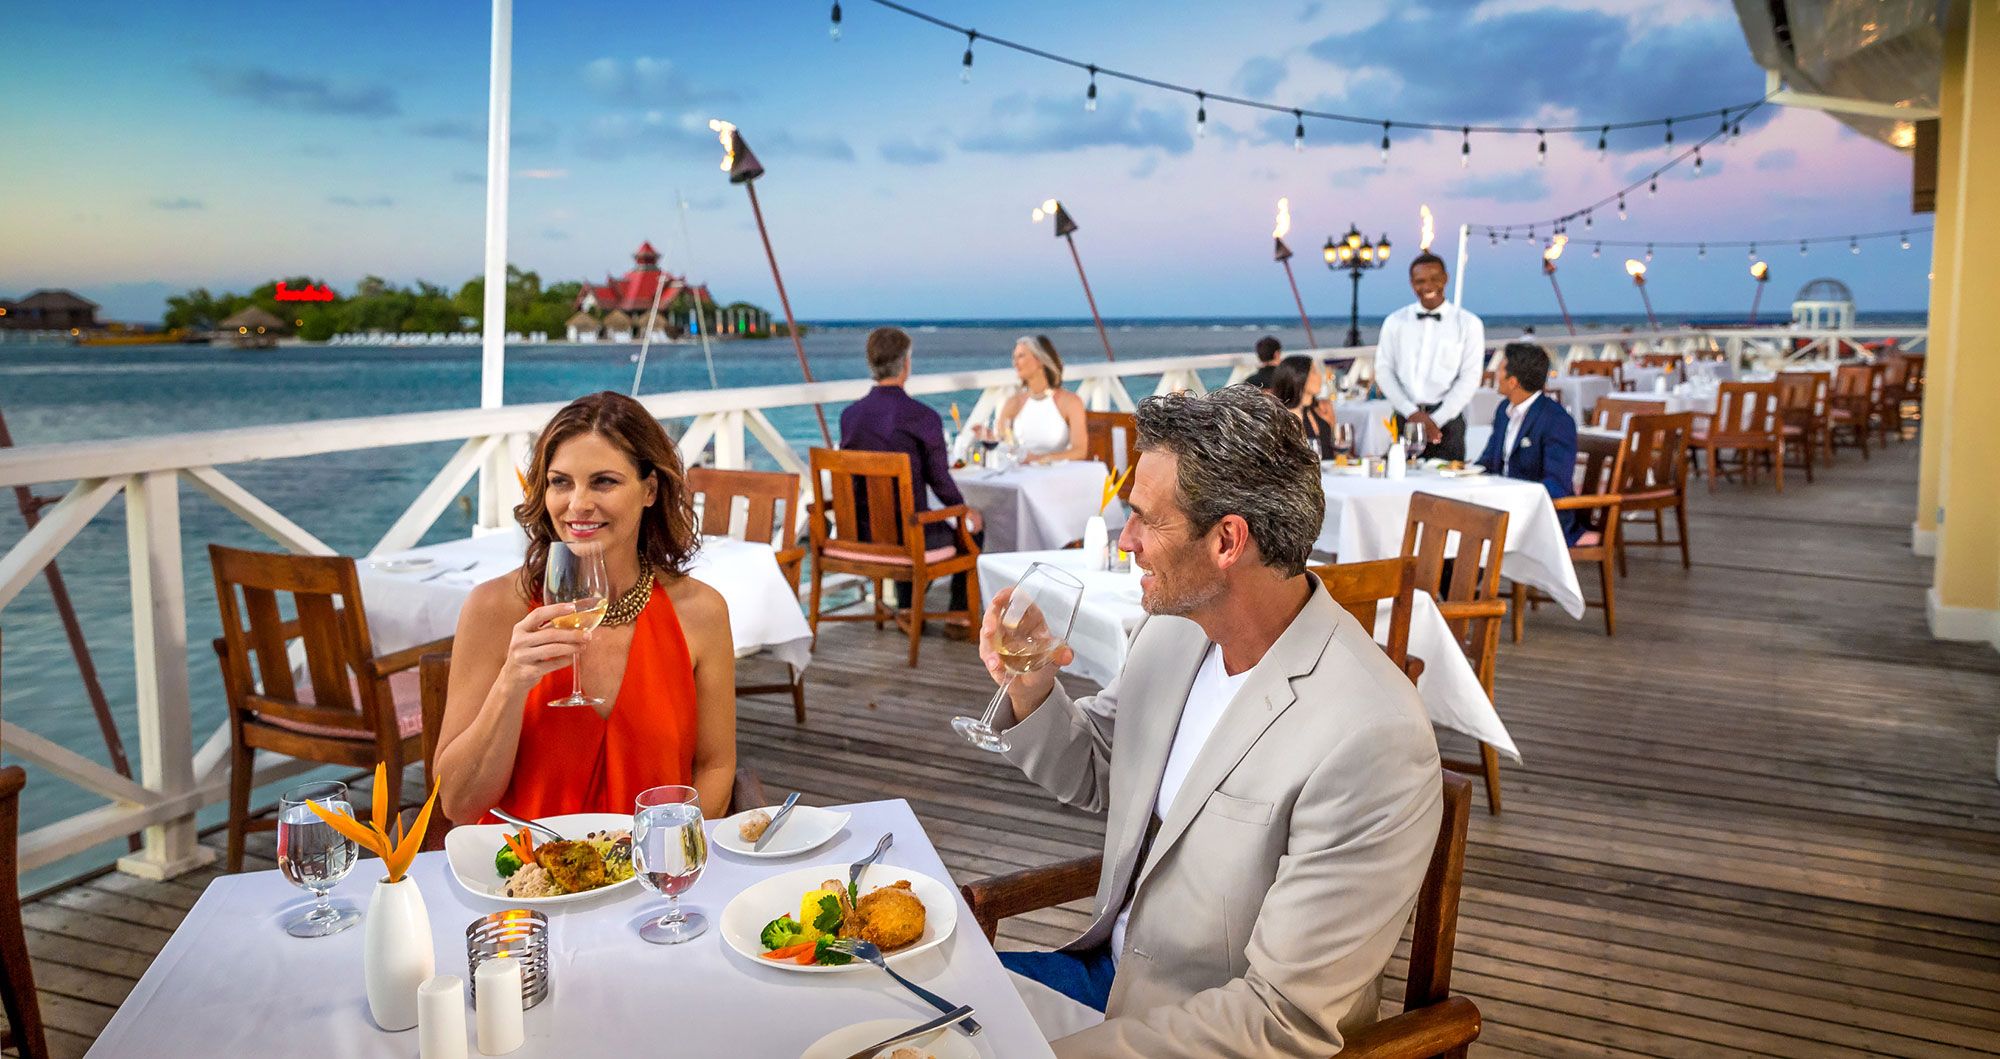 Where To Find The Best Food Options At Sandals All-Inclusive Resorts